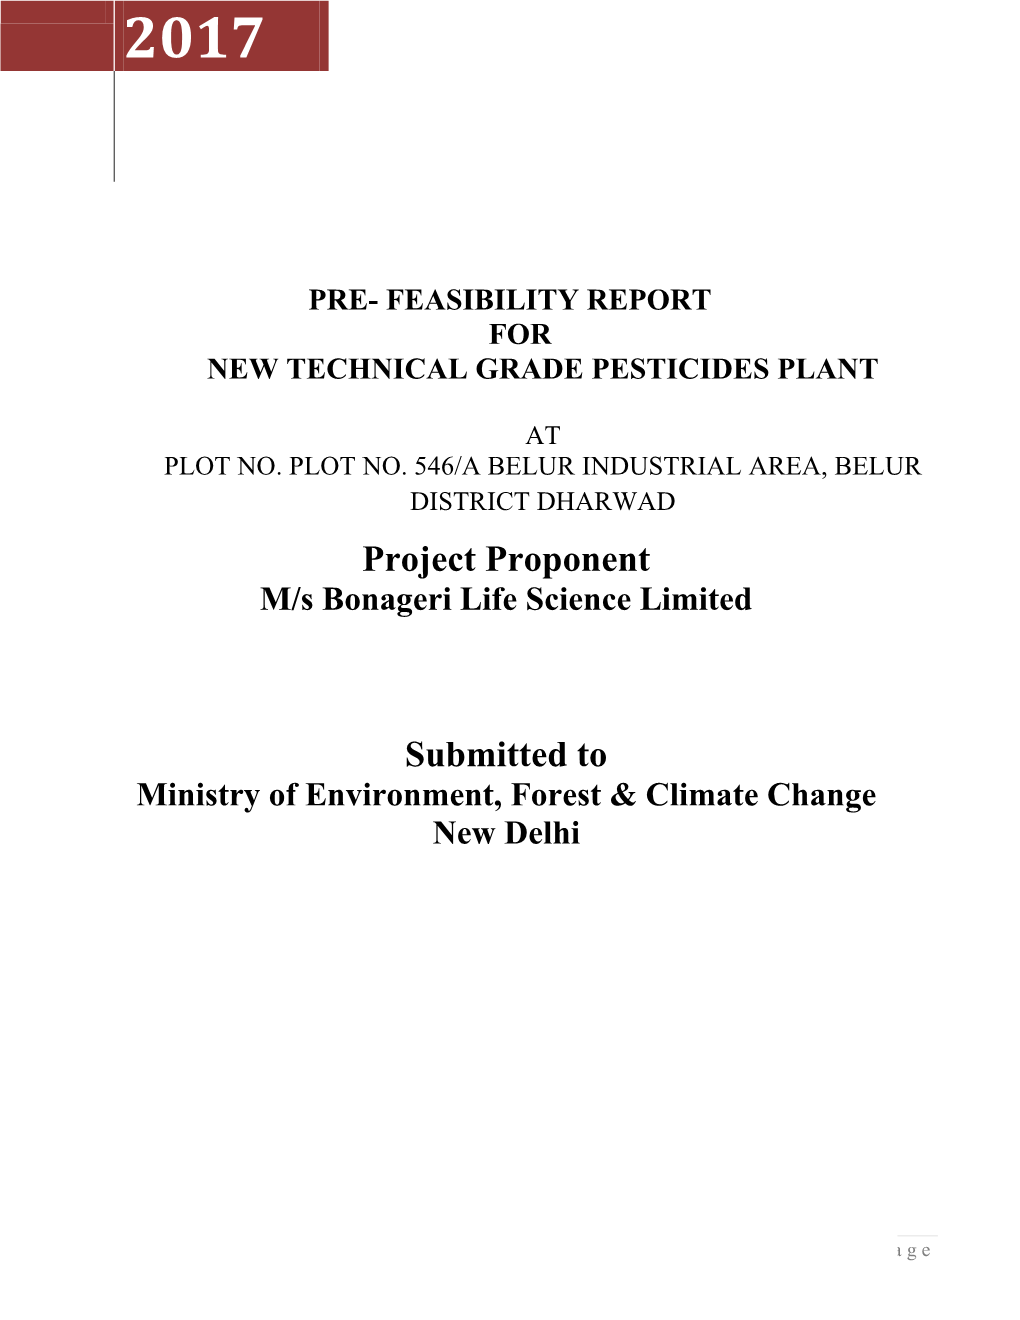 Project Proponent Submitted To